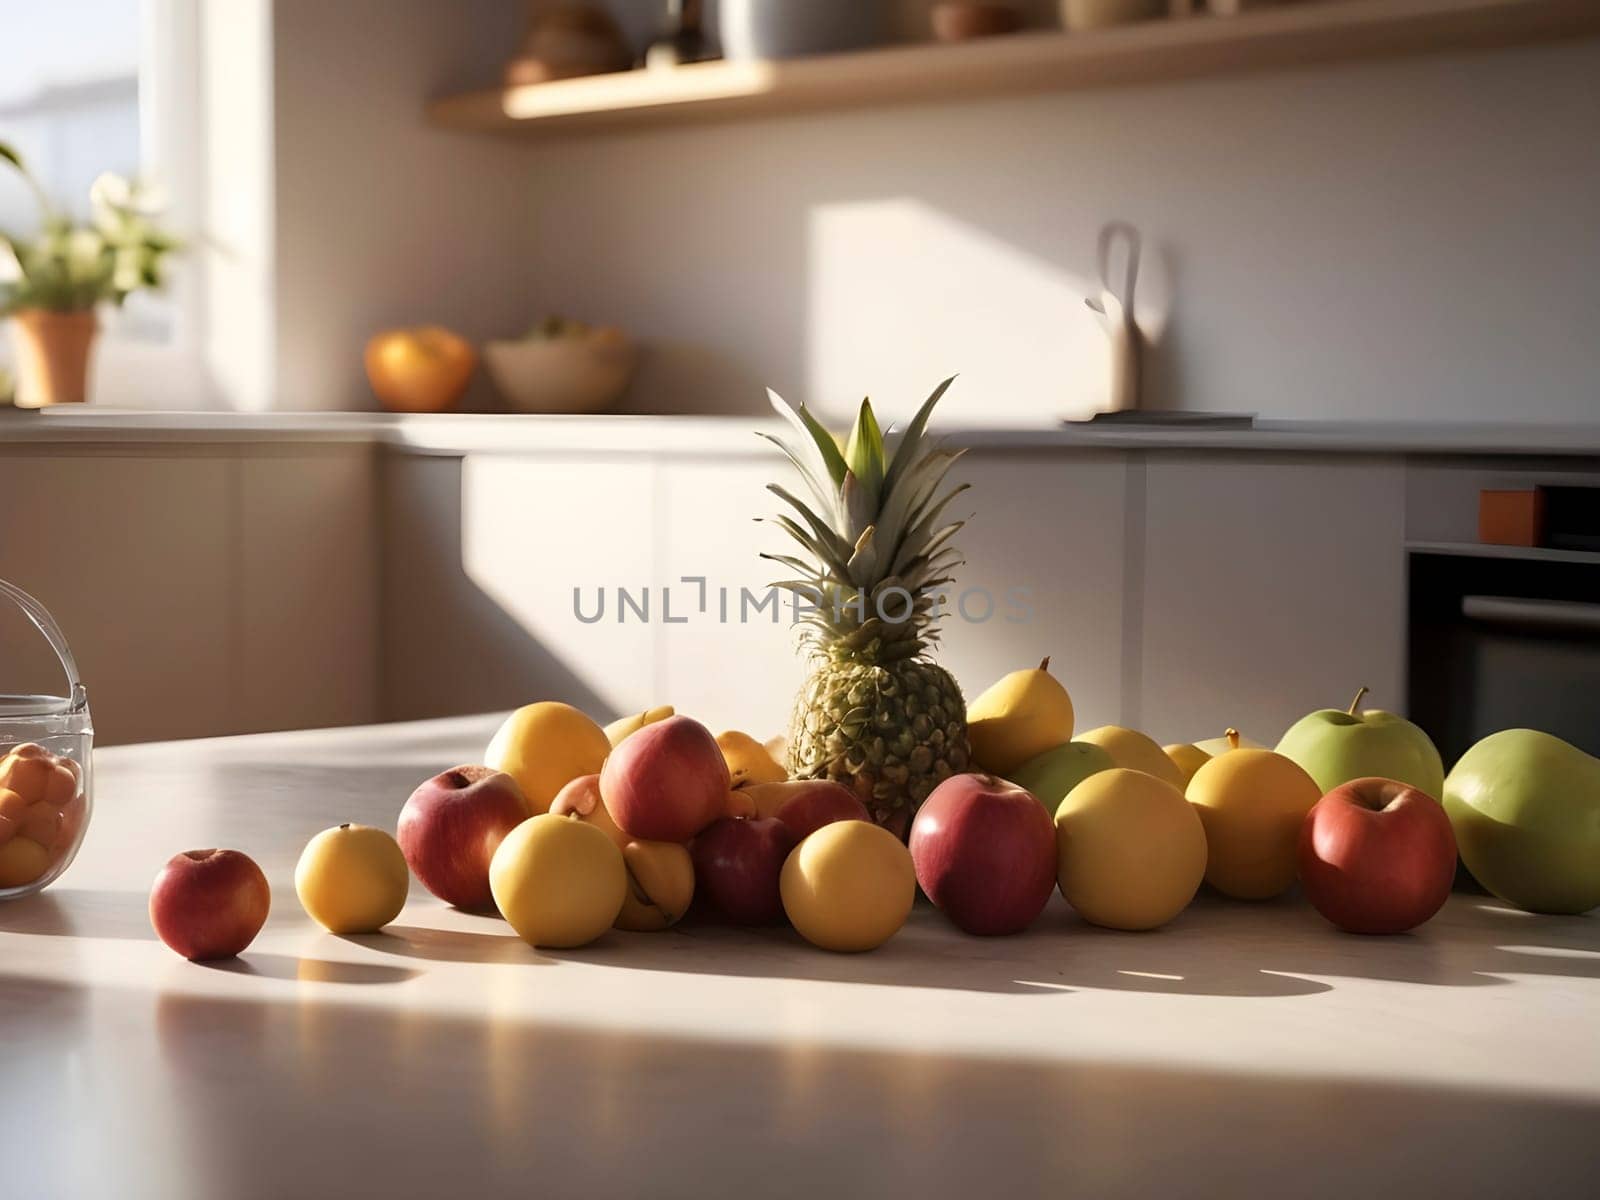 Afternoon Glow: A Welcoming Kitchen Vignette with Giaca Fruit in the Foreground.